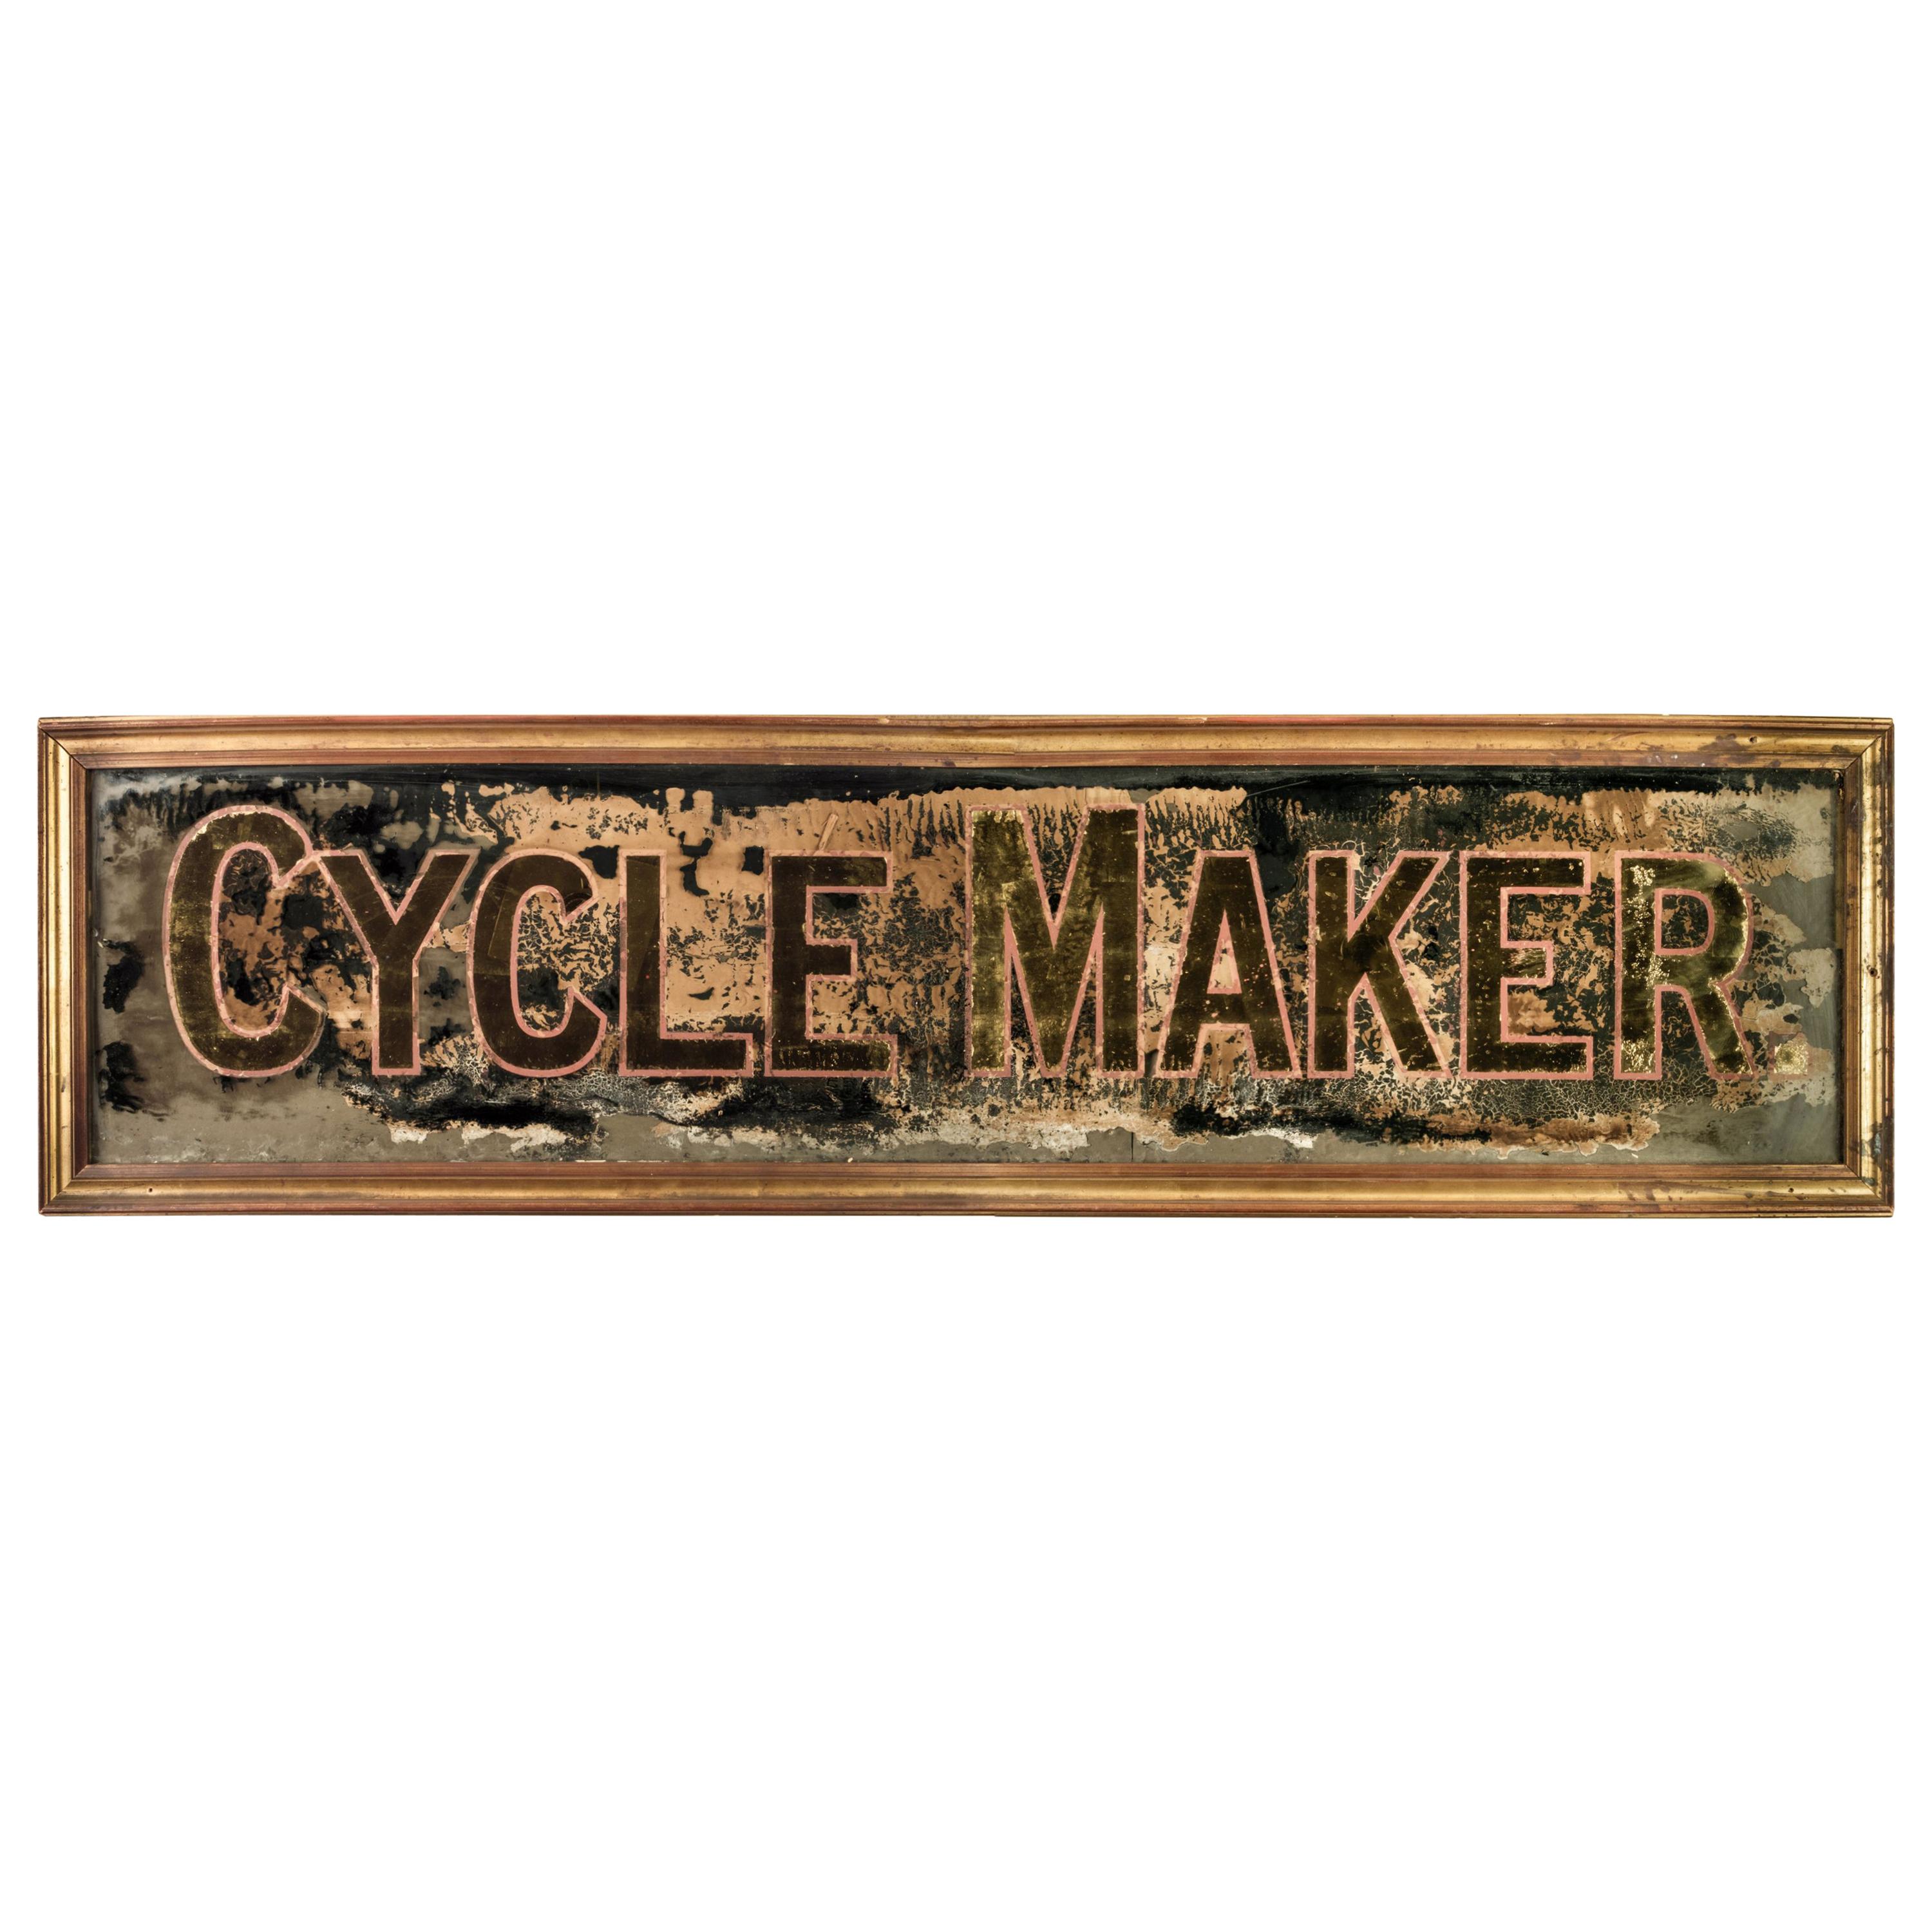 Large Reverse Glass Painted Cycle Maker Advertising Sign, circa 1930-1935